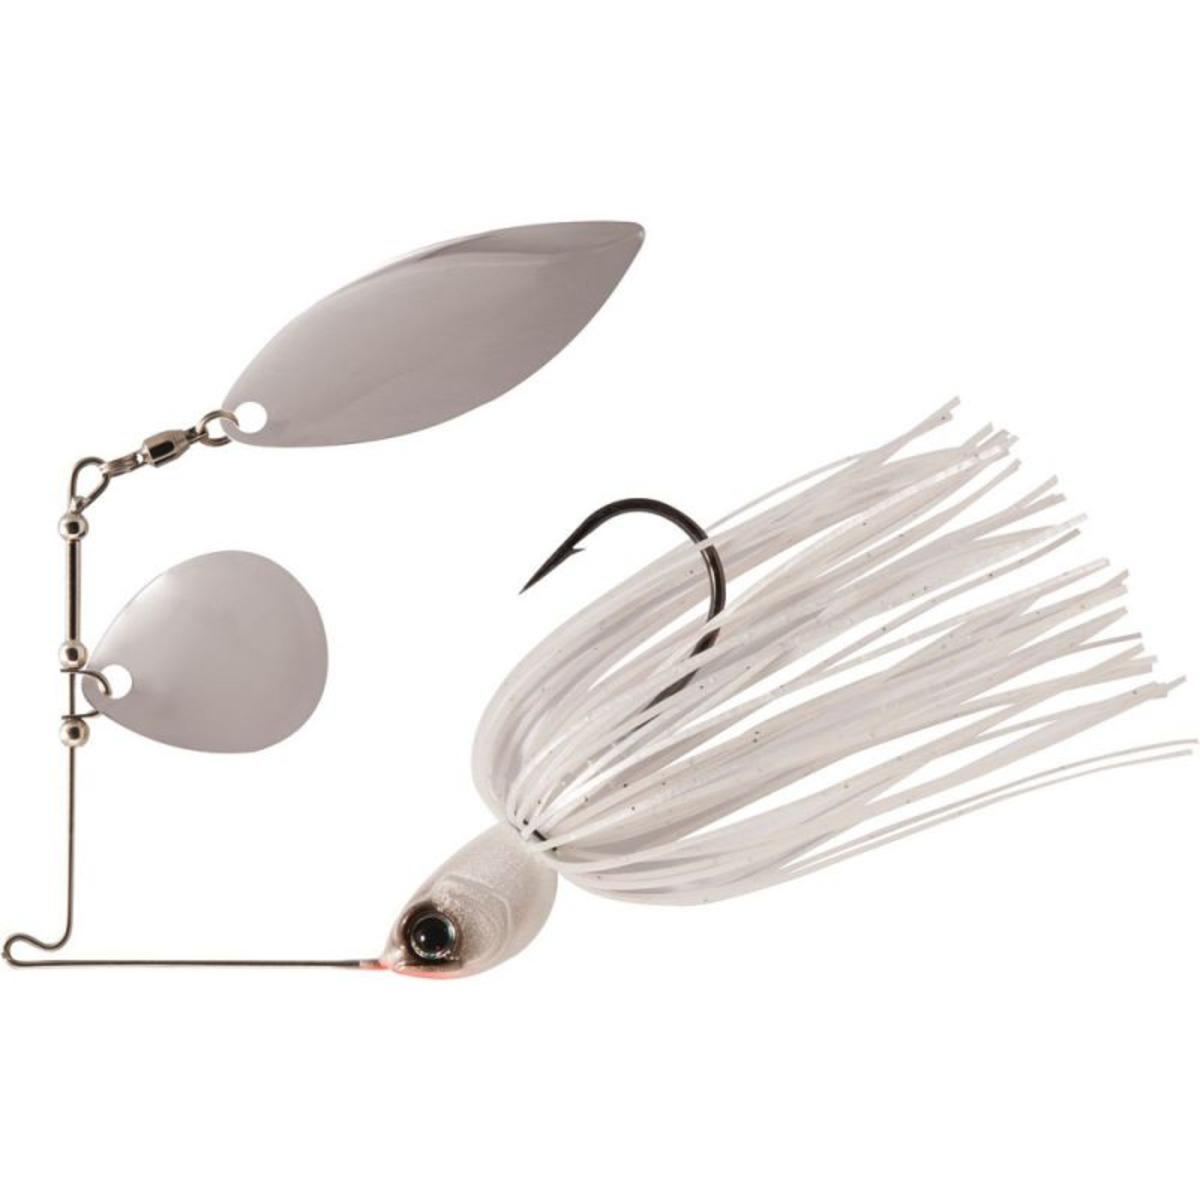 Rapture Sharp Spin Willow Colorado - 10.0 g - White Shad